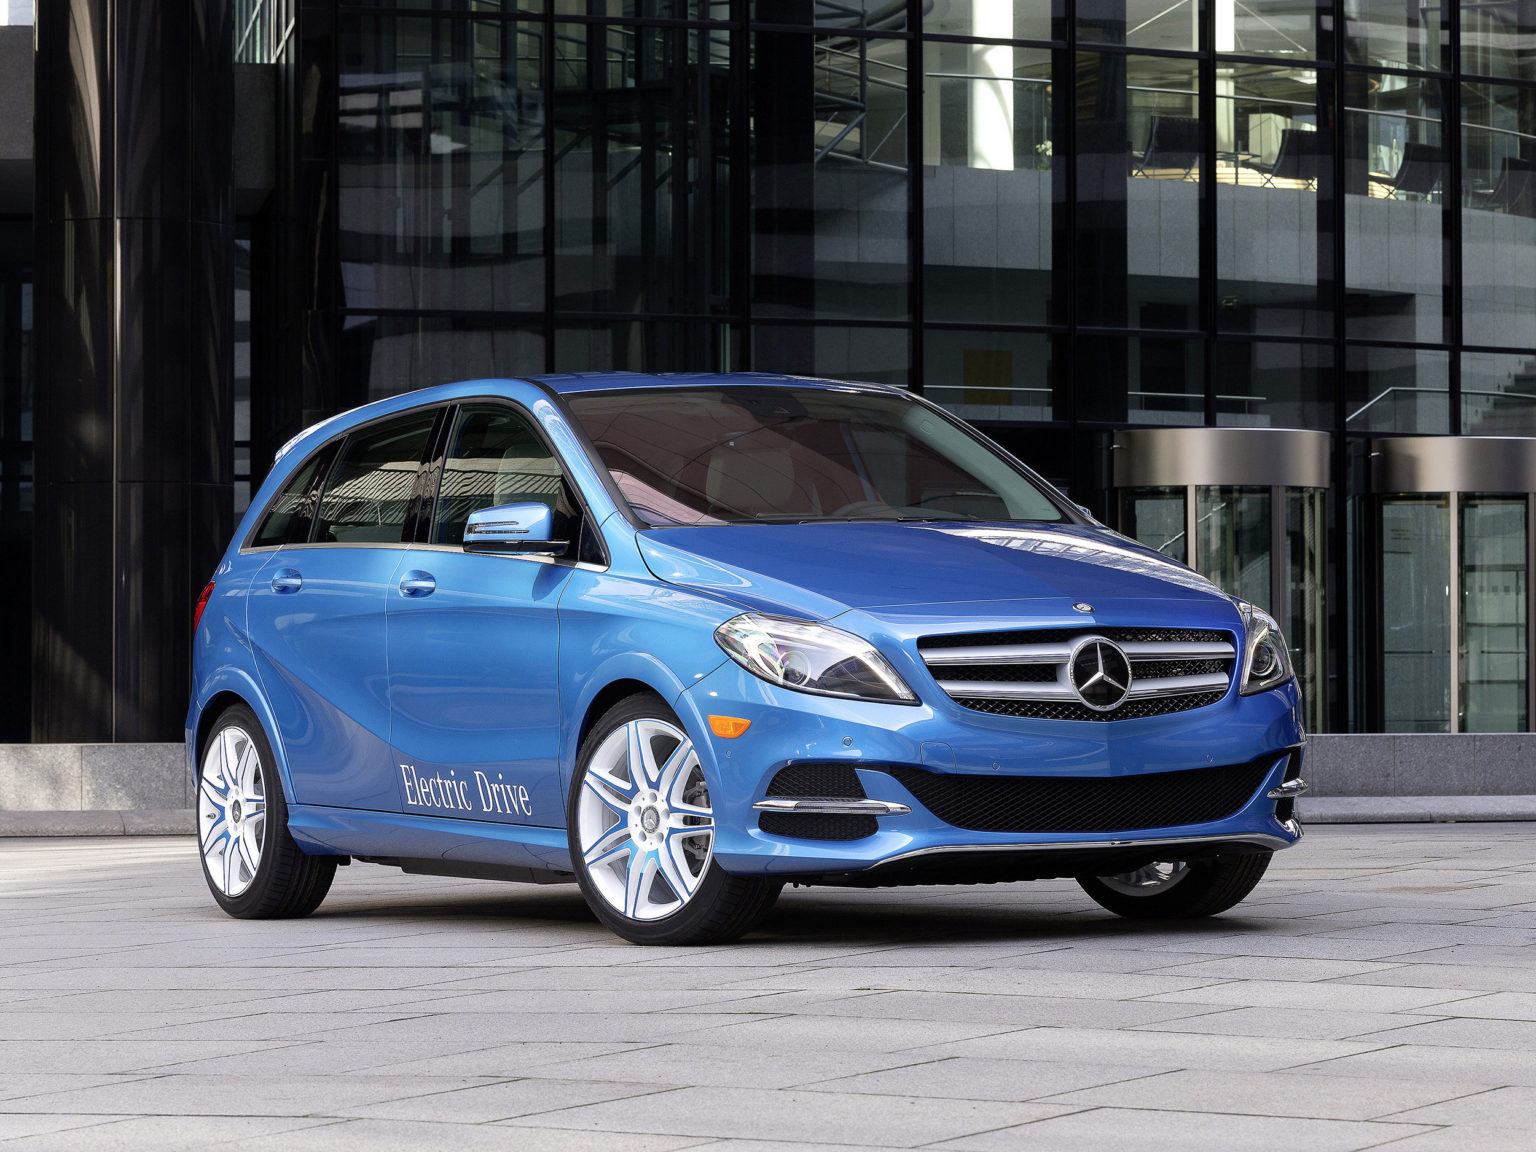 The Mercedes-Benz B-Class, which has been discontinued in the U.S., is one of 2019's worse-selling models.